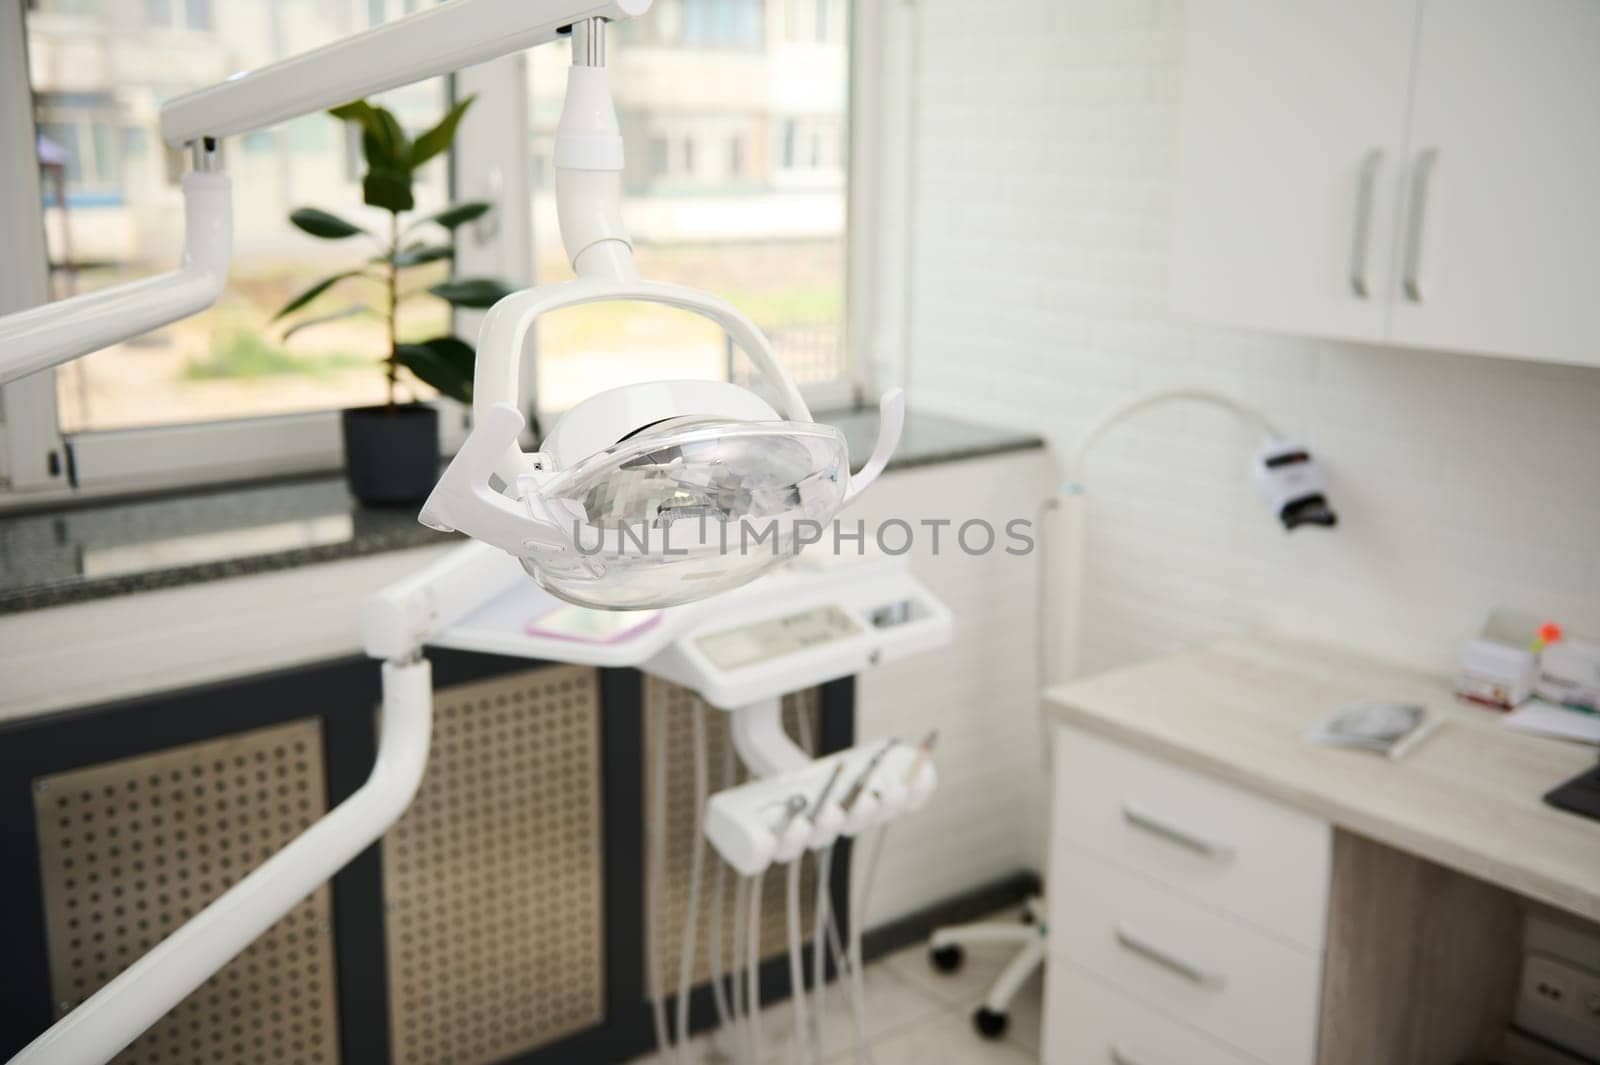 Focus on dental operating lamp with directional LED light. Interior of new modern dental clinic. Medical equipment by artgf